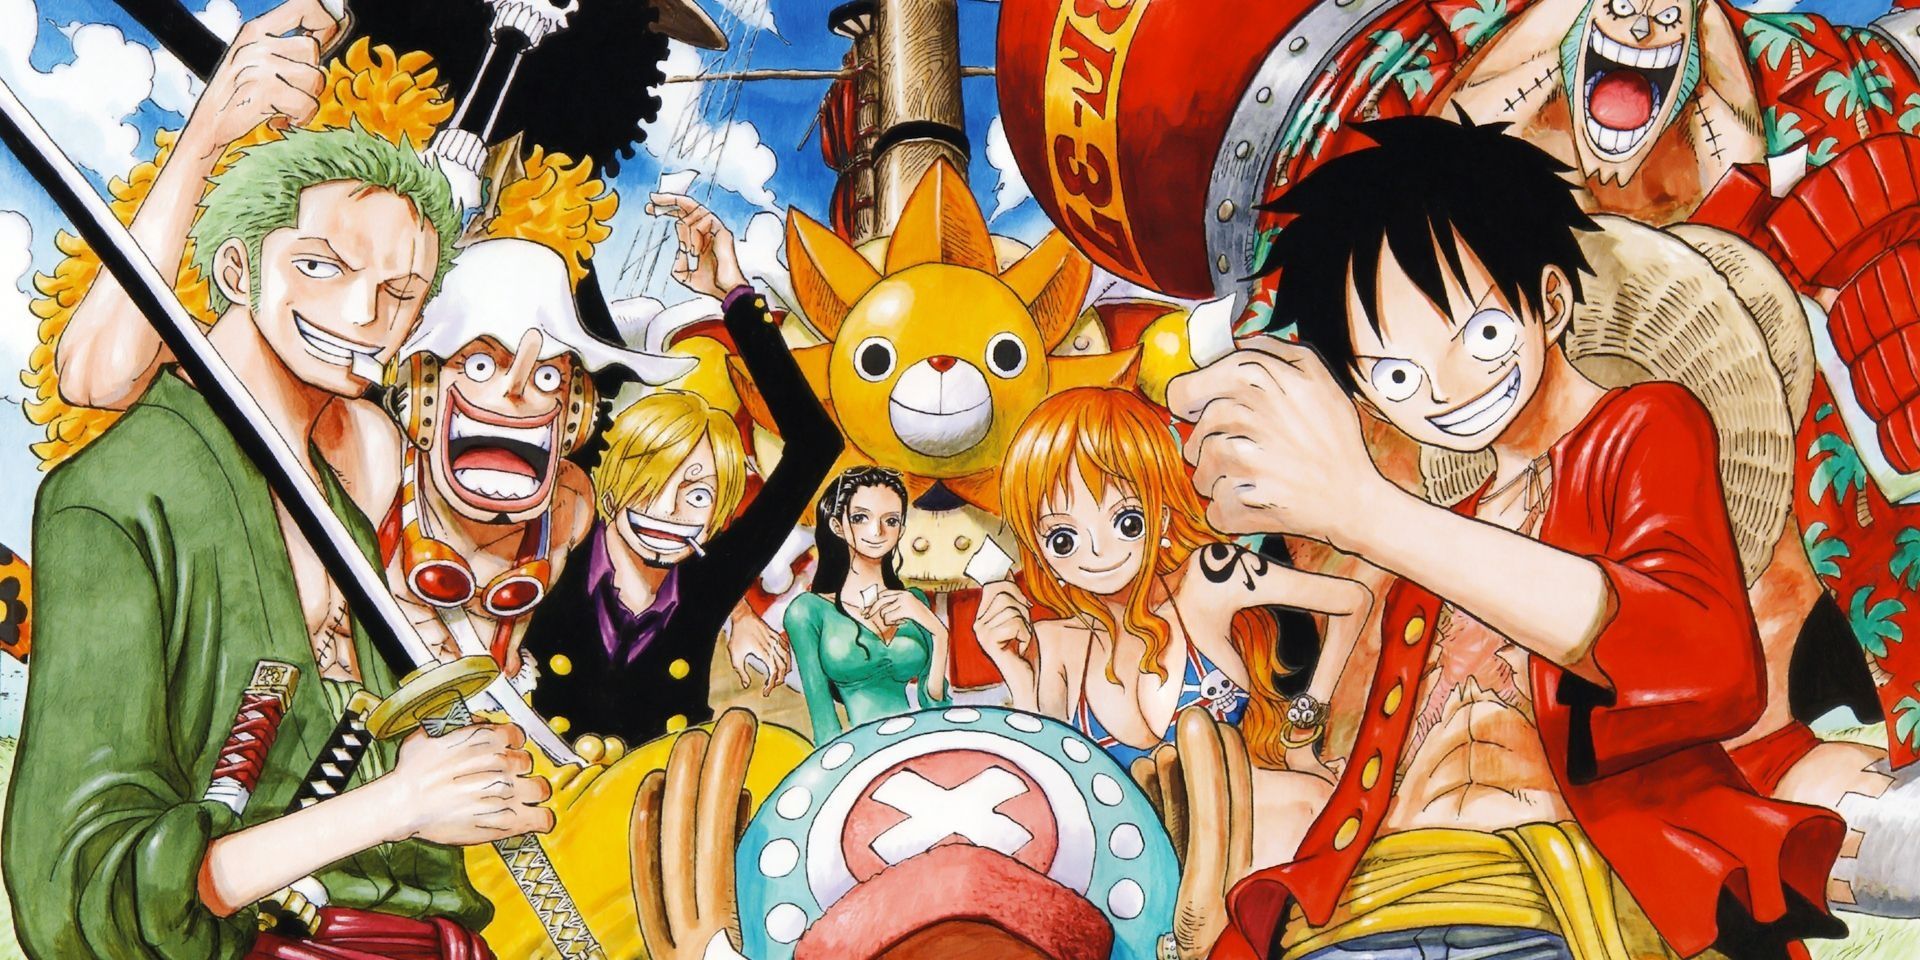 All the Straw Hat Pirates looking at the camera